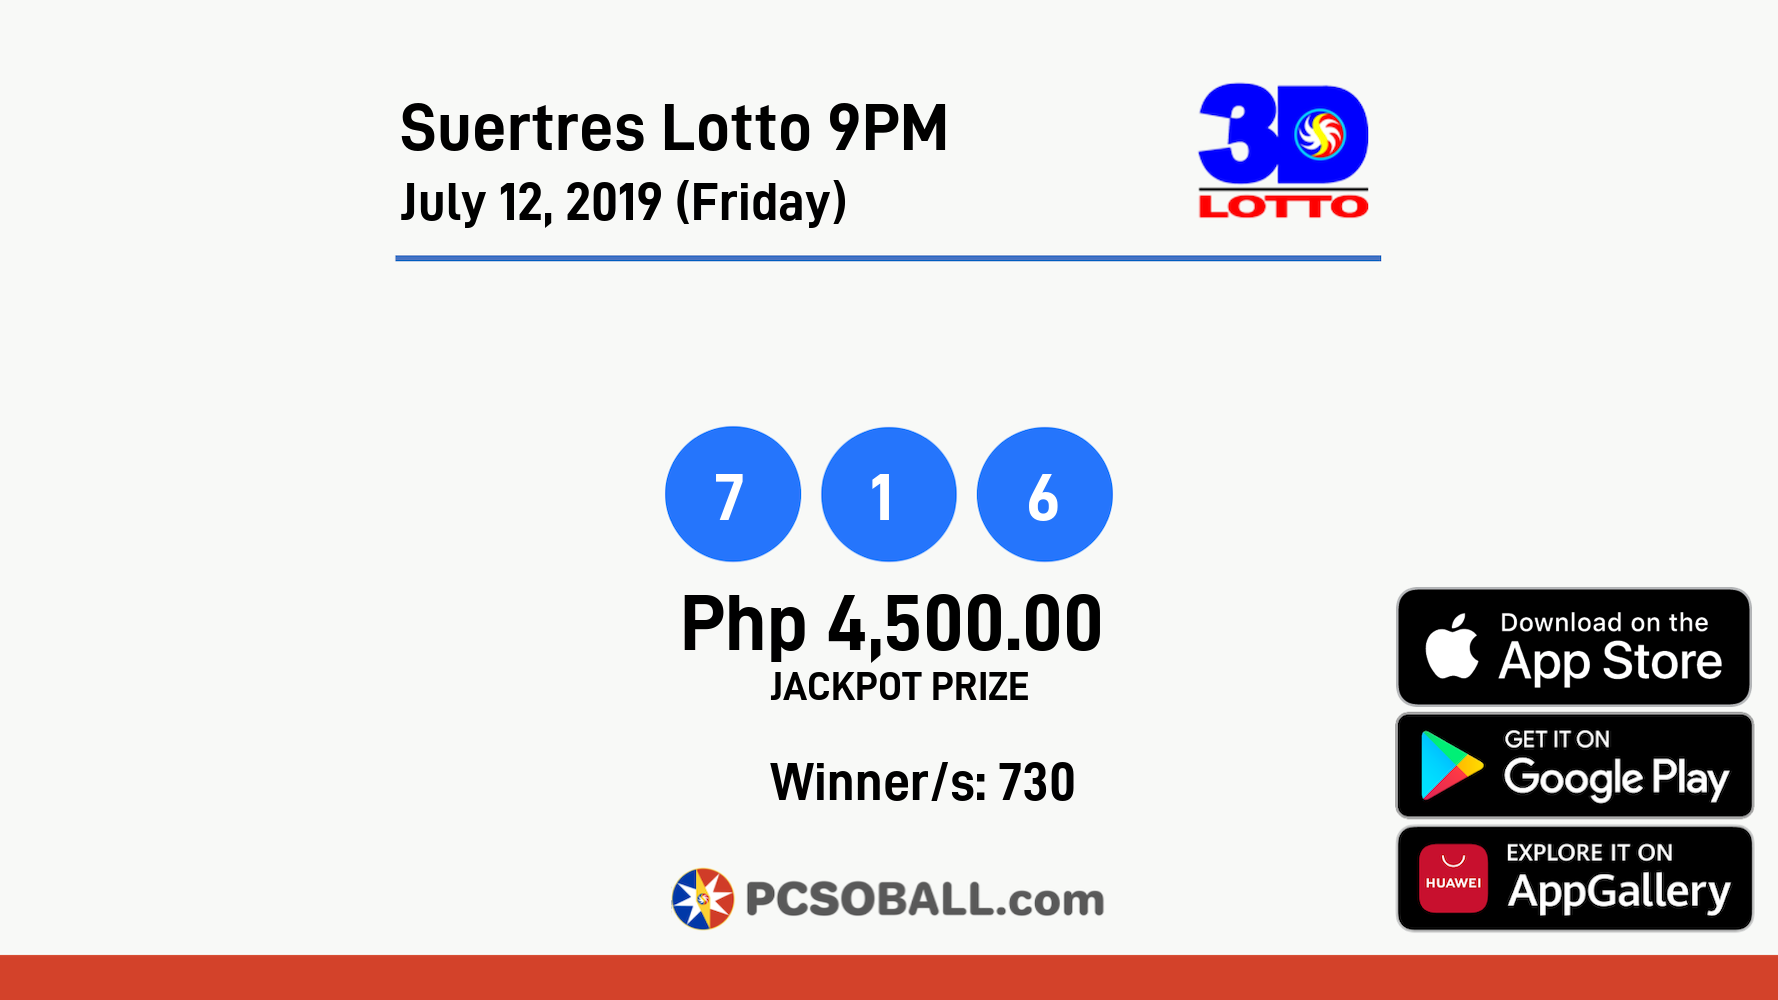 Suertres Lotto 9PM July 12, 2019 (Friday) Result